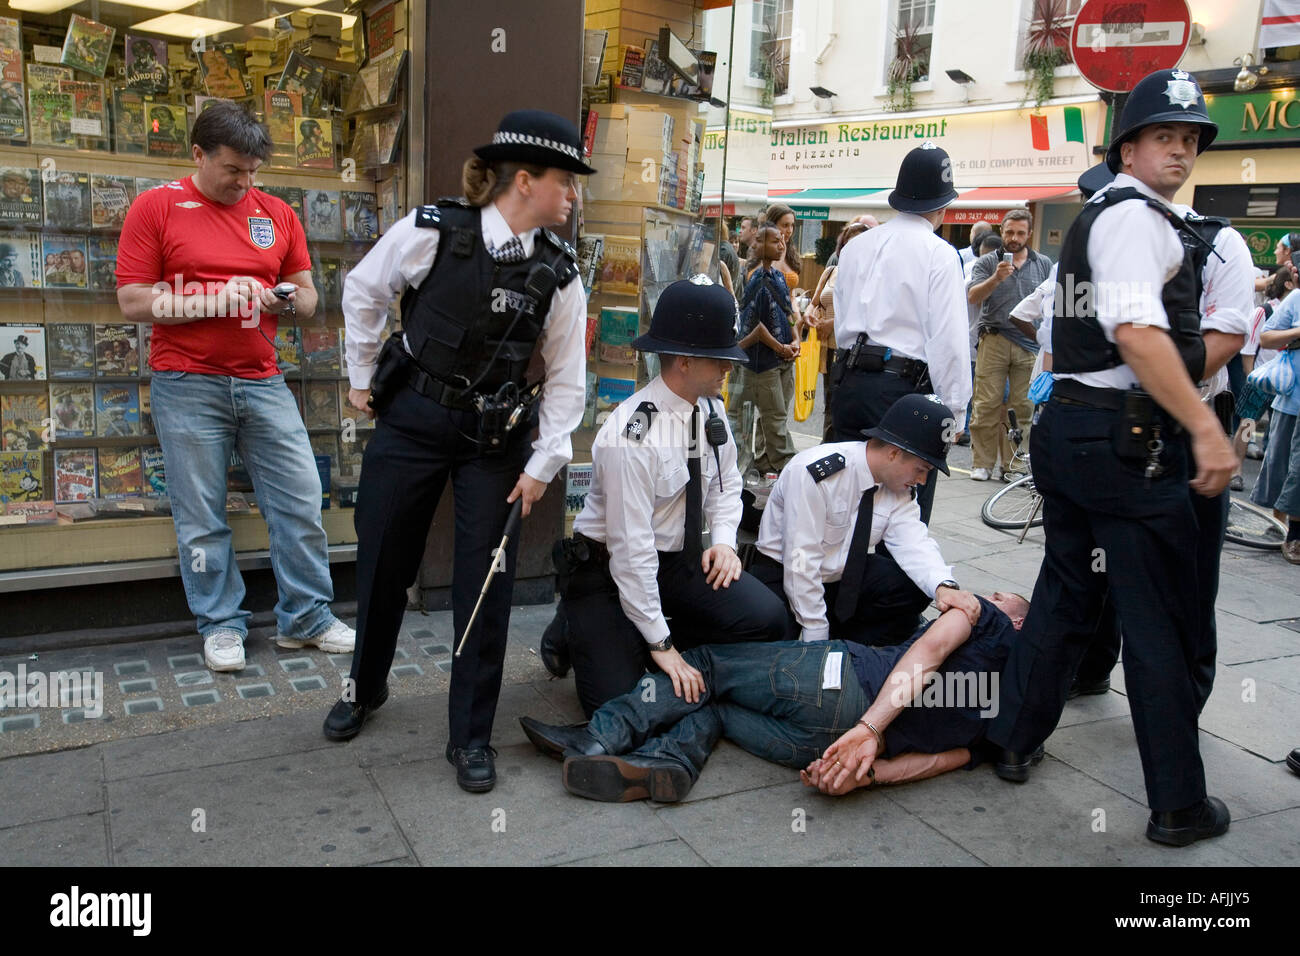 Police officers making an arrest London England Britain UK Stock Photo